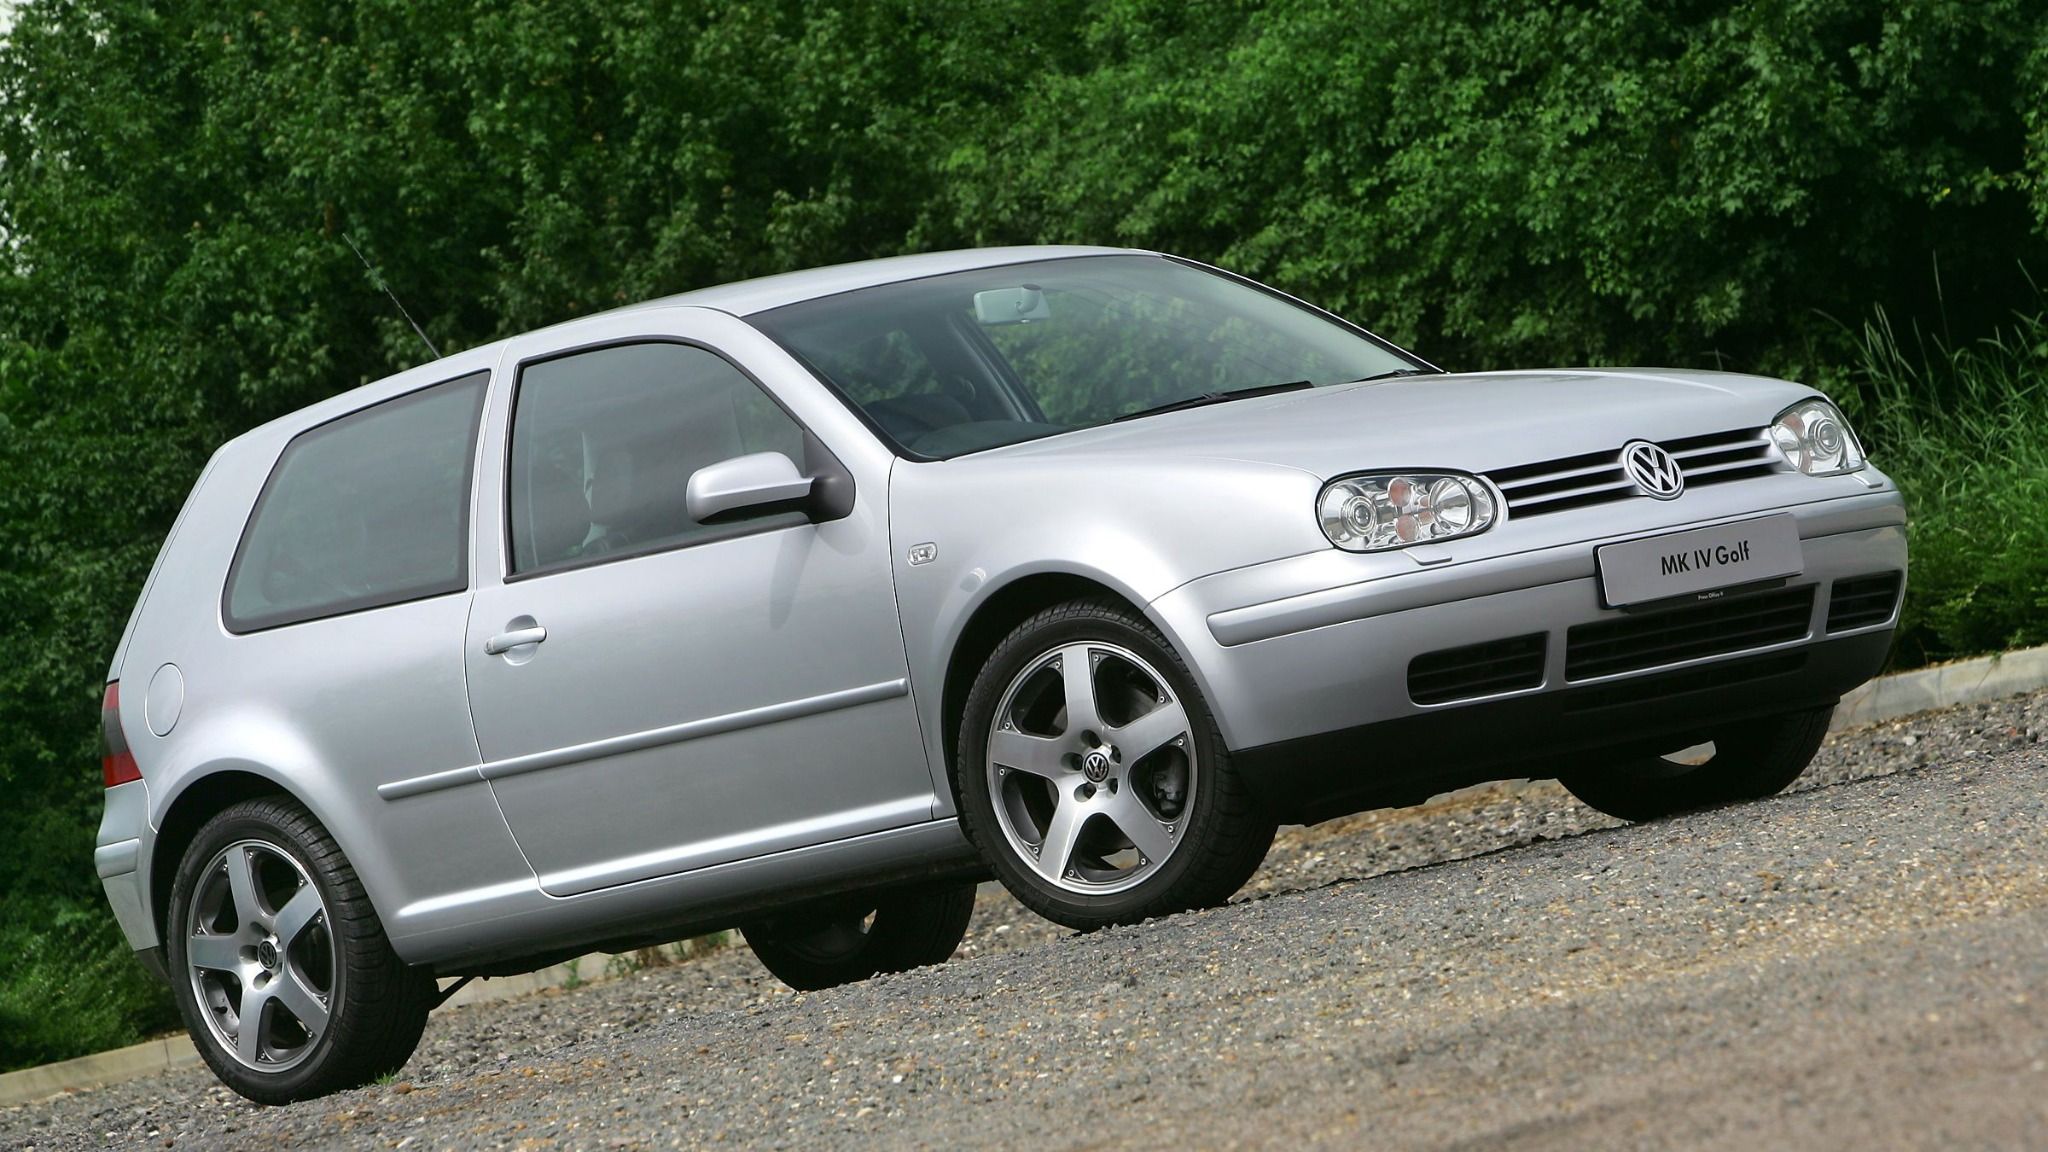 Front view of a silver VW Golf GTI MkIV